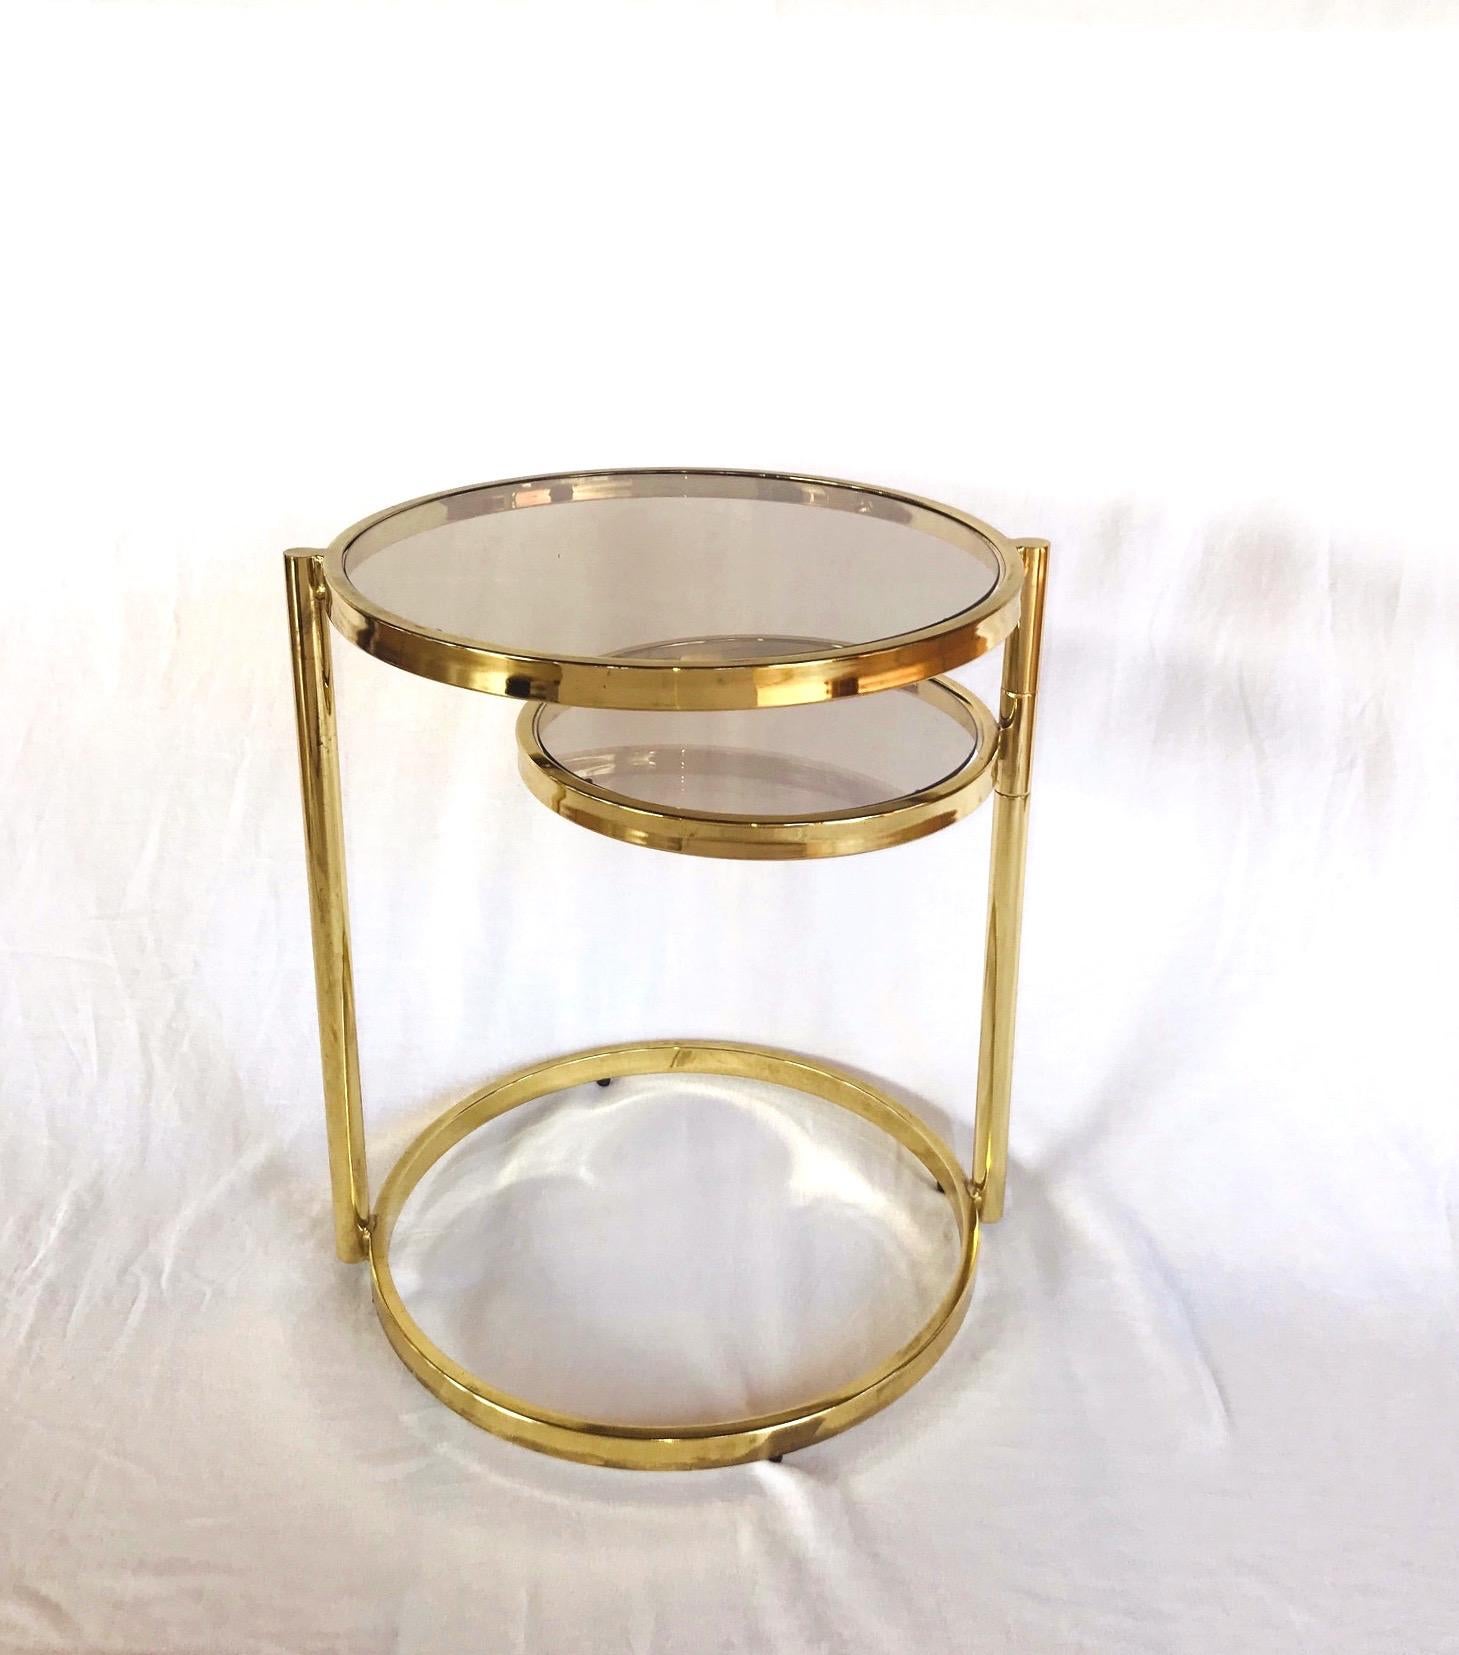 American Hollywood Regency Brass and Smoked Glass Swivel Side Table by DIA, 1970s